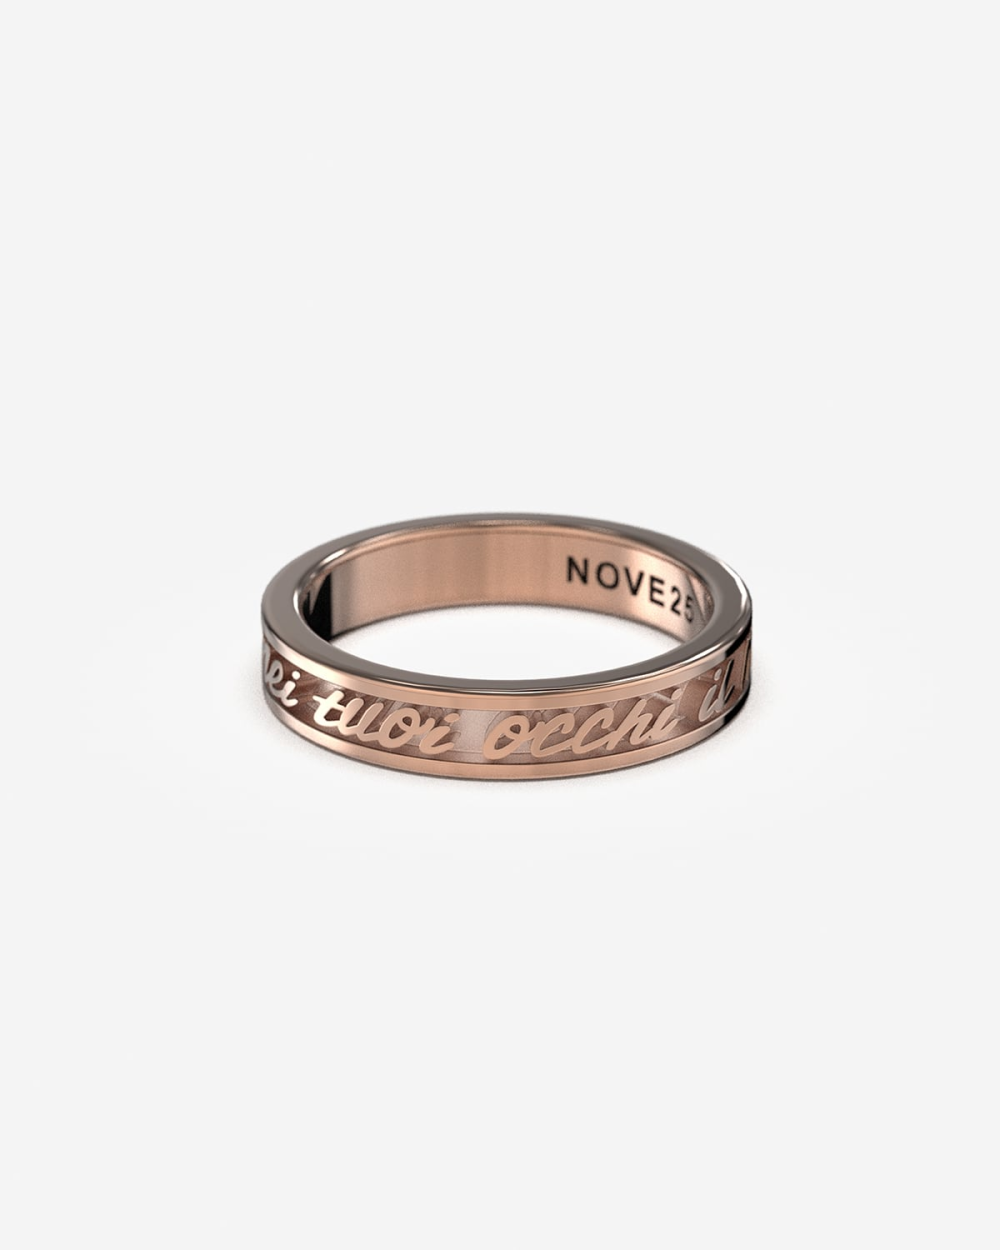 GOLD TEXT PROMISE RING